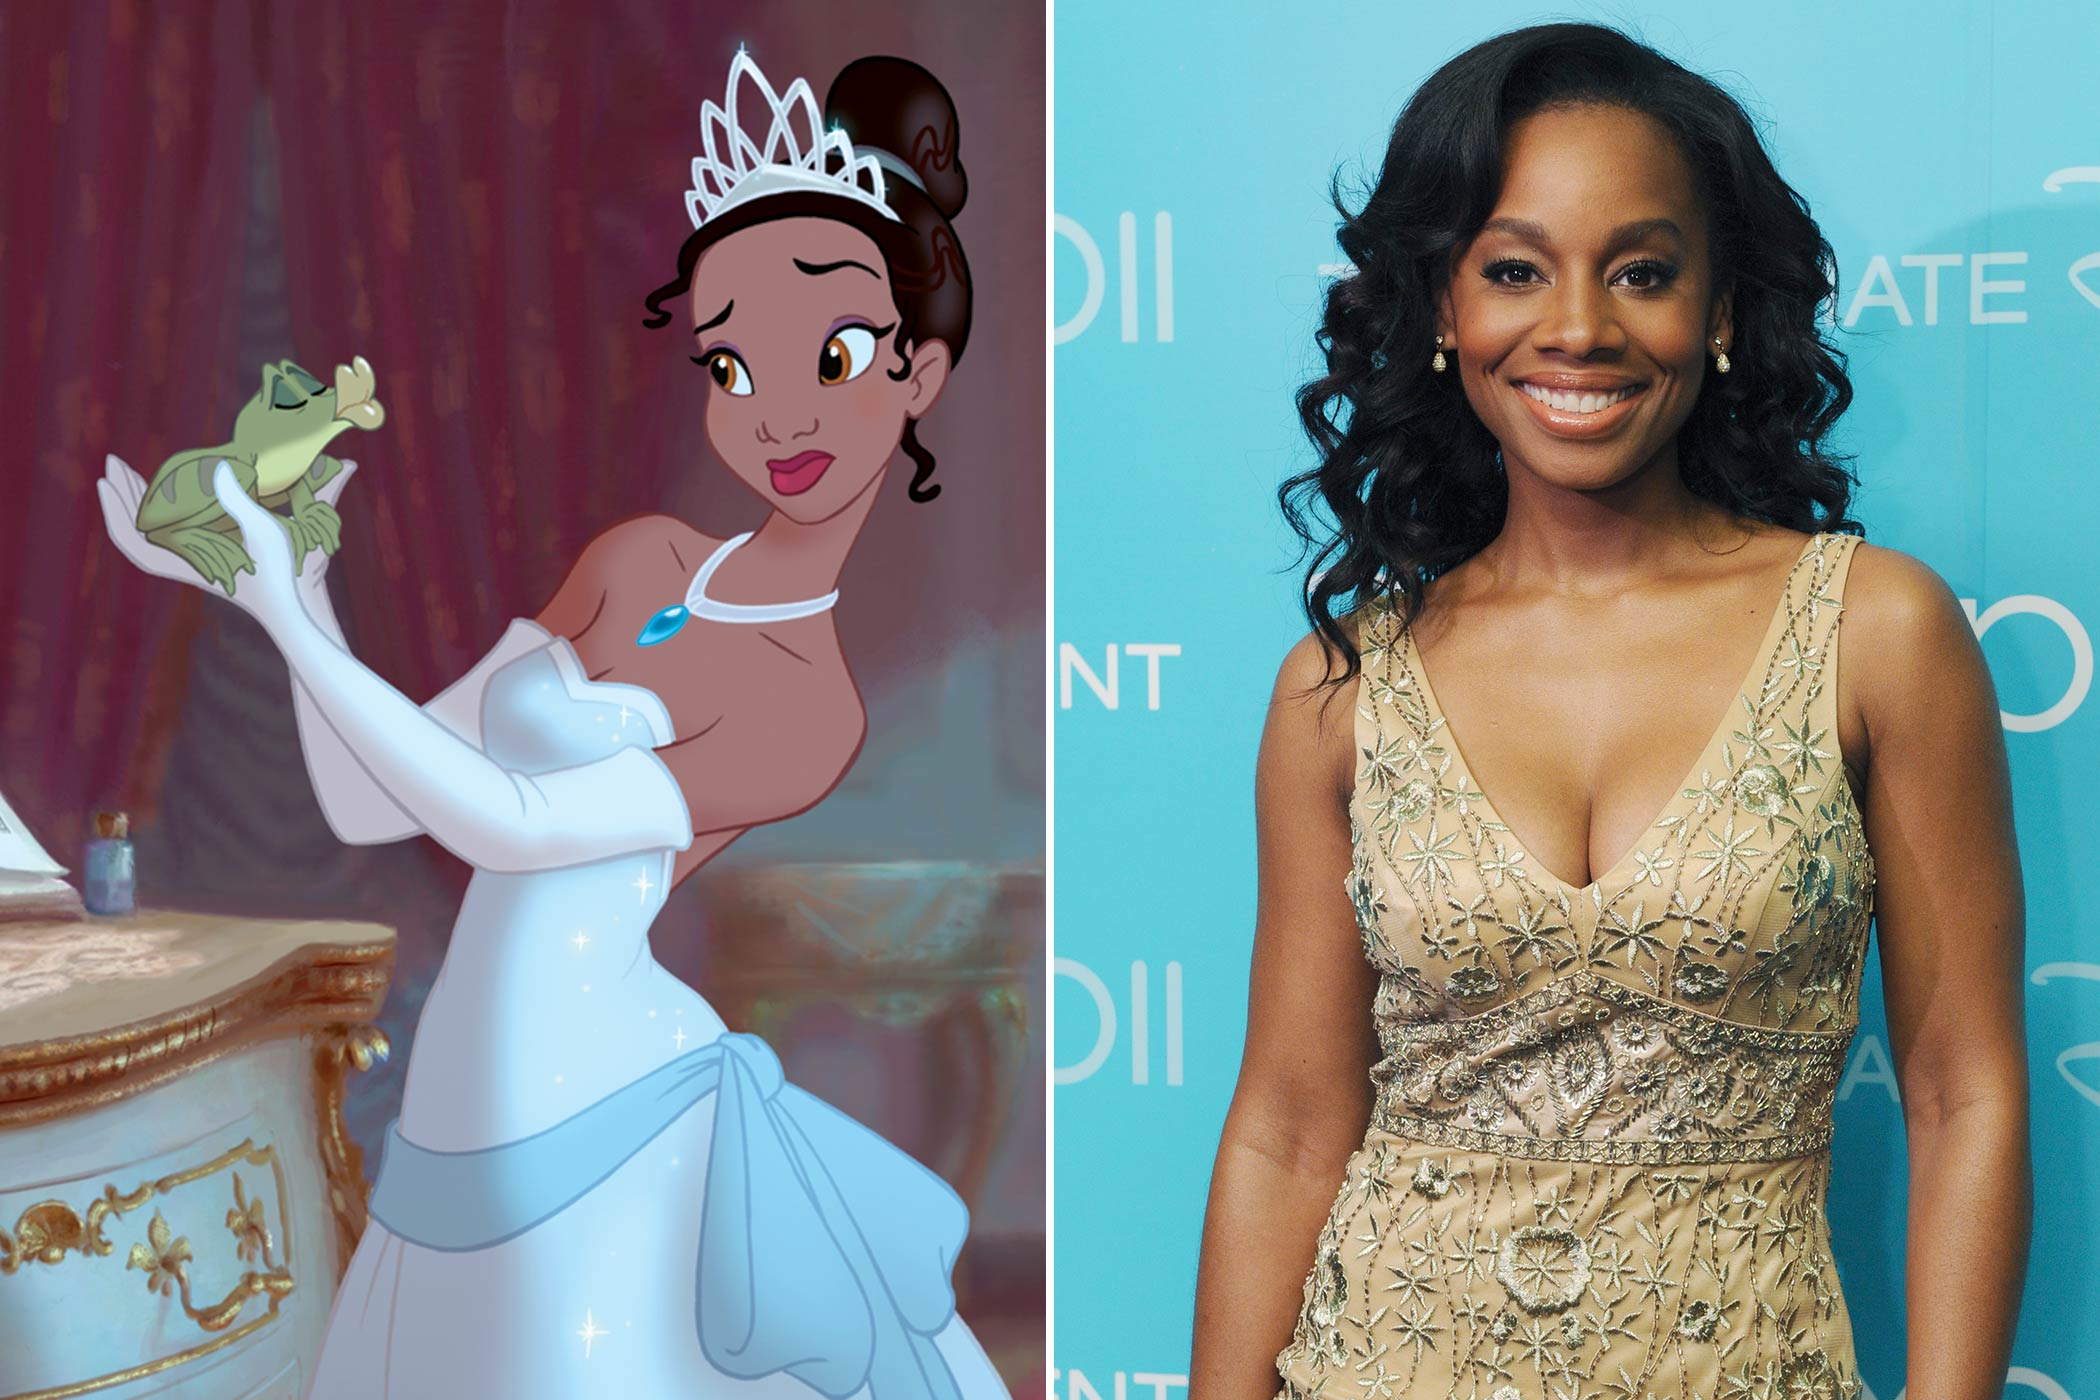 Tiana: Anika Noni Rose
                              It was Anika Noni Rose’s lifelong dream to work for Disney. “Since I was a little kid I wanted to work for Disney—and I didn’t need to be the Princess! I would have been a tick or a flea!” The Tony Award winning actress got her wish when she was chosen to voice Tiana in The Frog Princess. In 2011, Rose would also be inducted into the Disney Legends, a hall of fame for those who have made a significant impact on the Disney legacy.